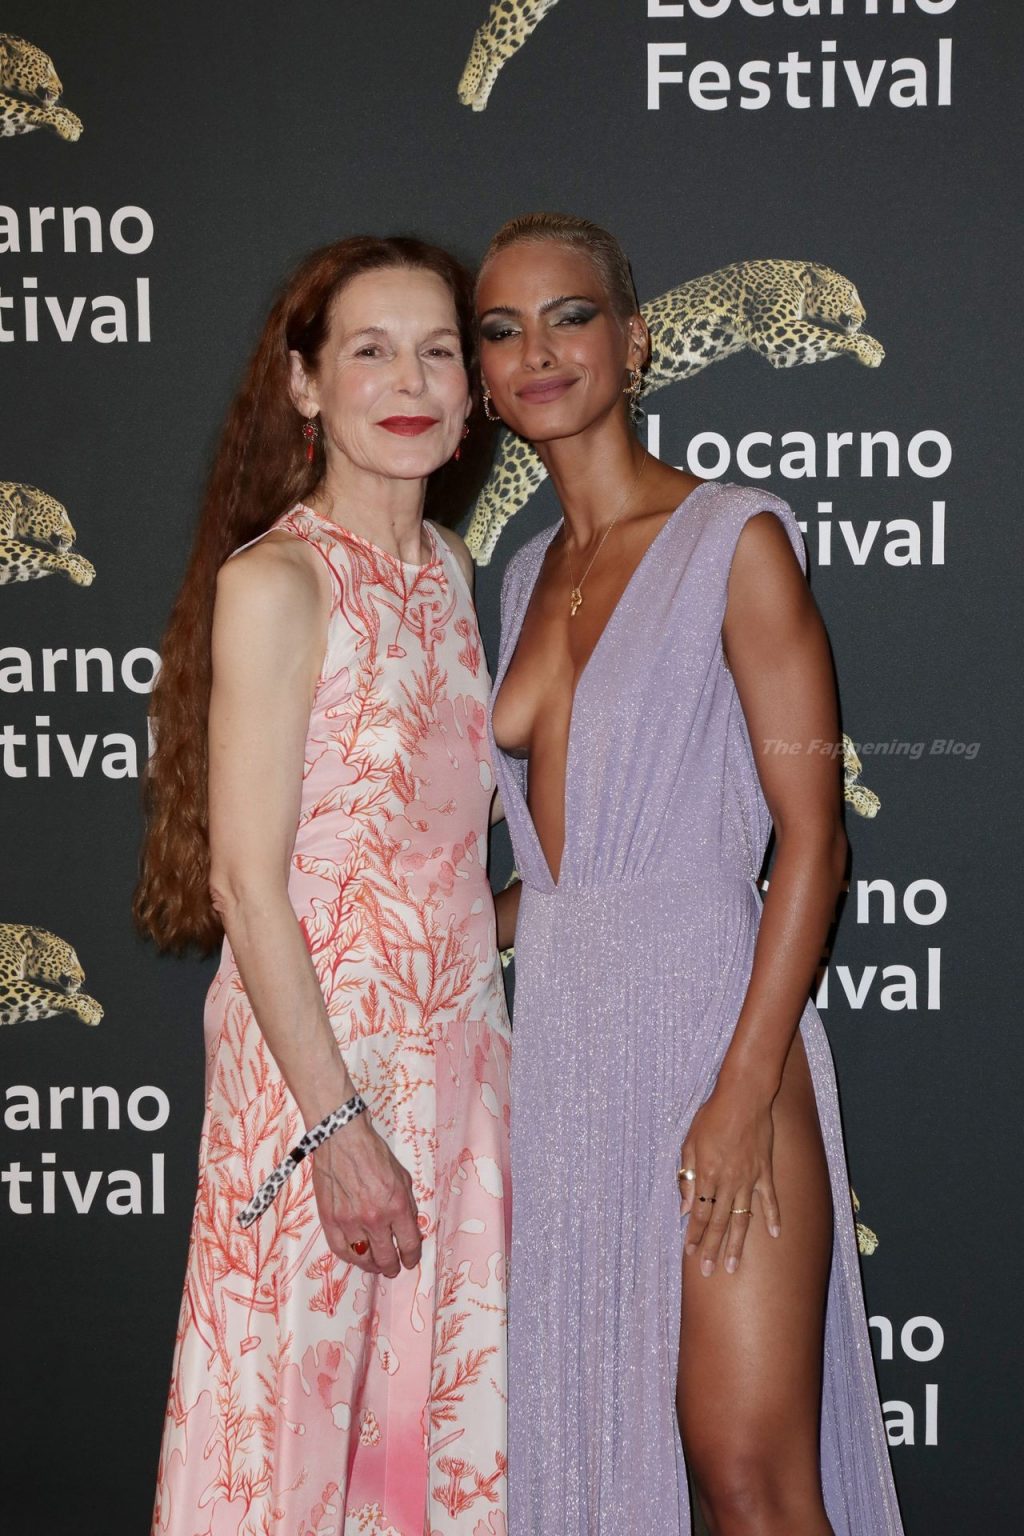 Kota Eberhardt Shows Her Tits During the 74th Locarno International Film Festival (47 Photos)